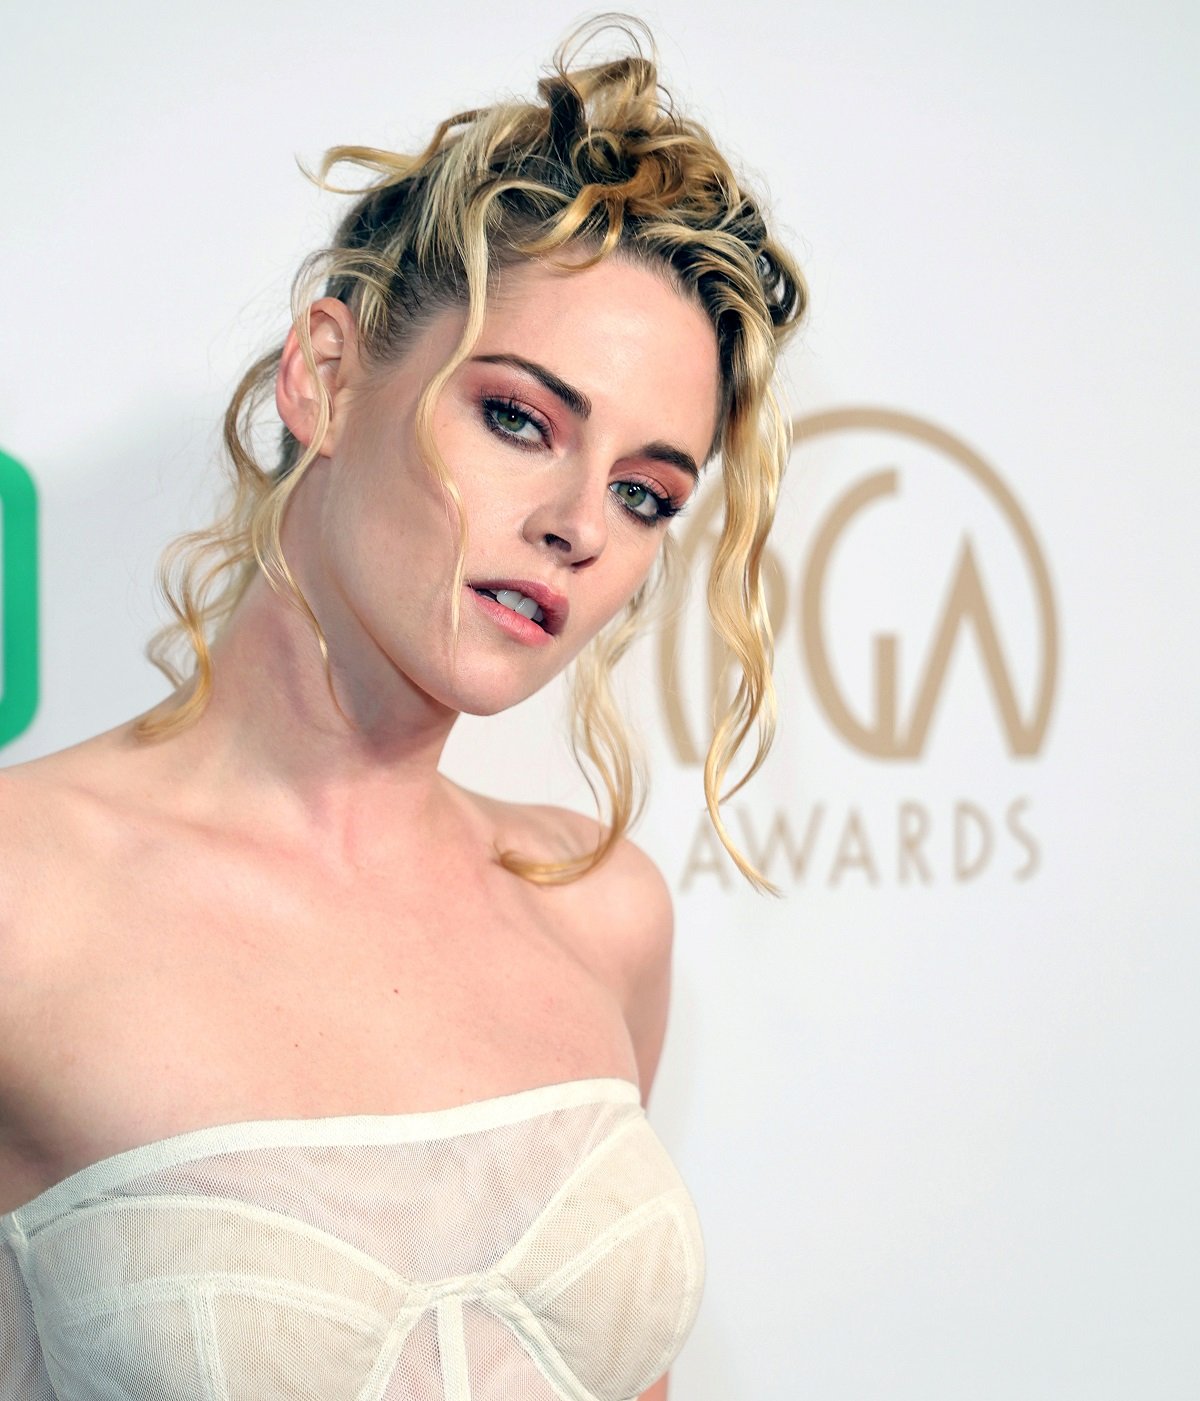 Kristen Stewart, who owns a Los Feliz mansion, poses on the red carpet at the 33rd Annual Producers Guild Awards